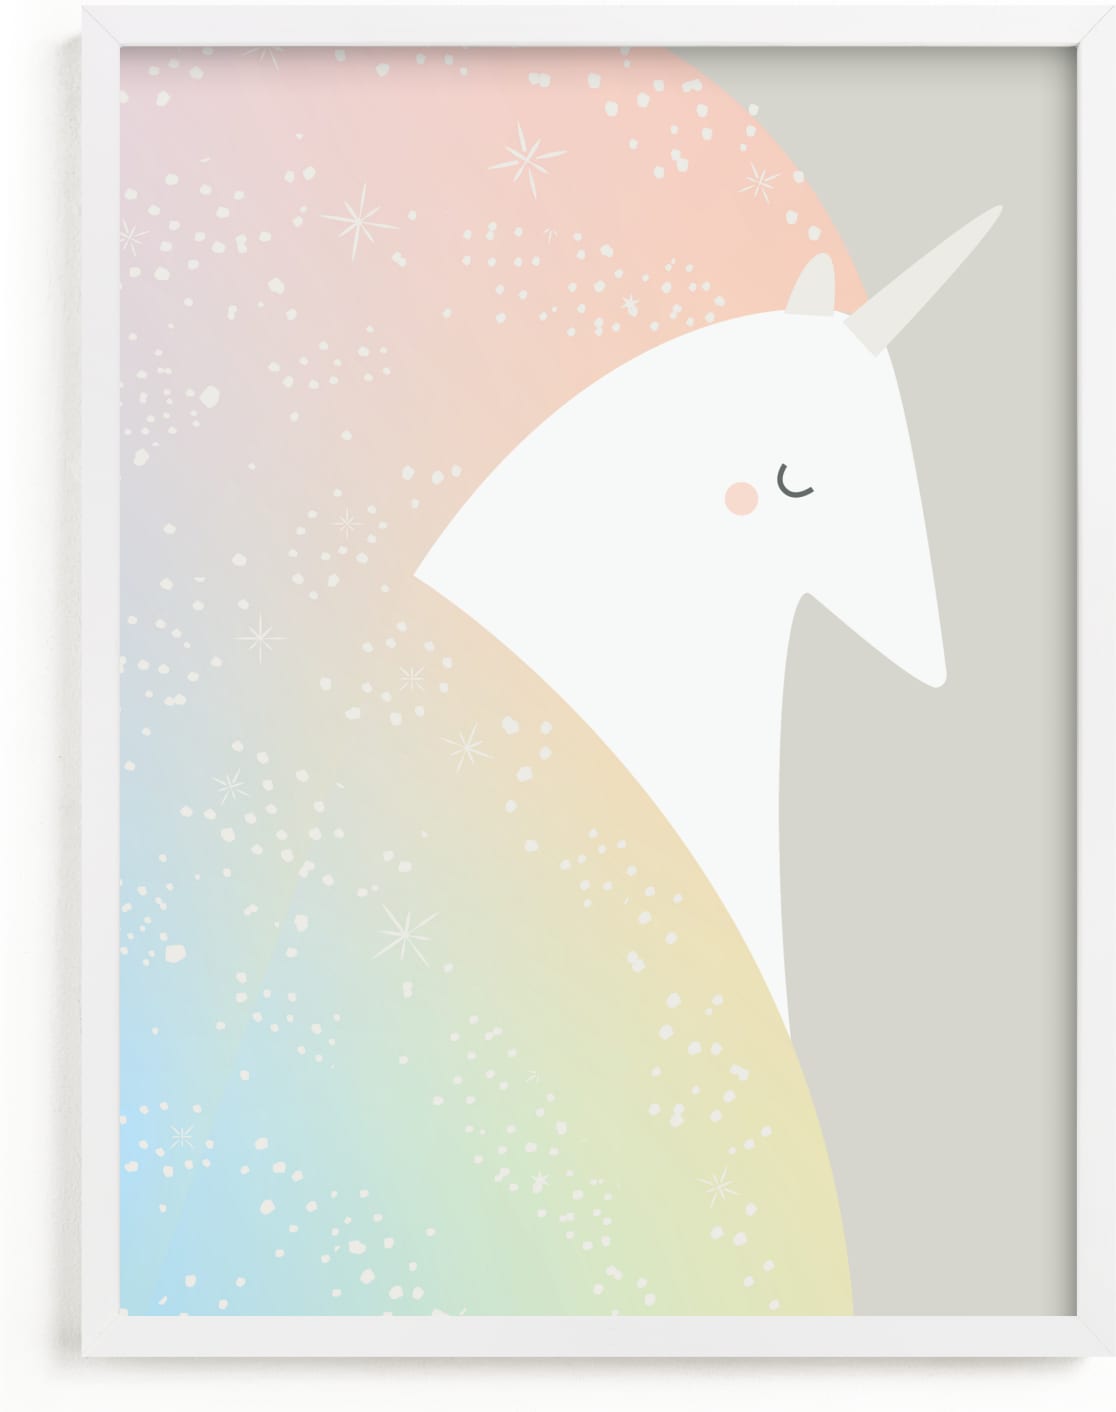 This is a colorful kids wall art by Lori Wemple called Unicorn.